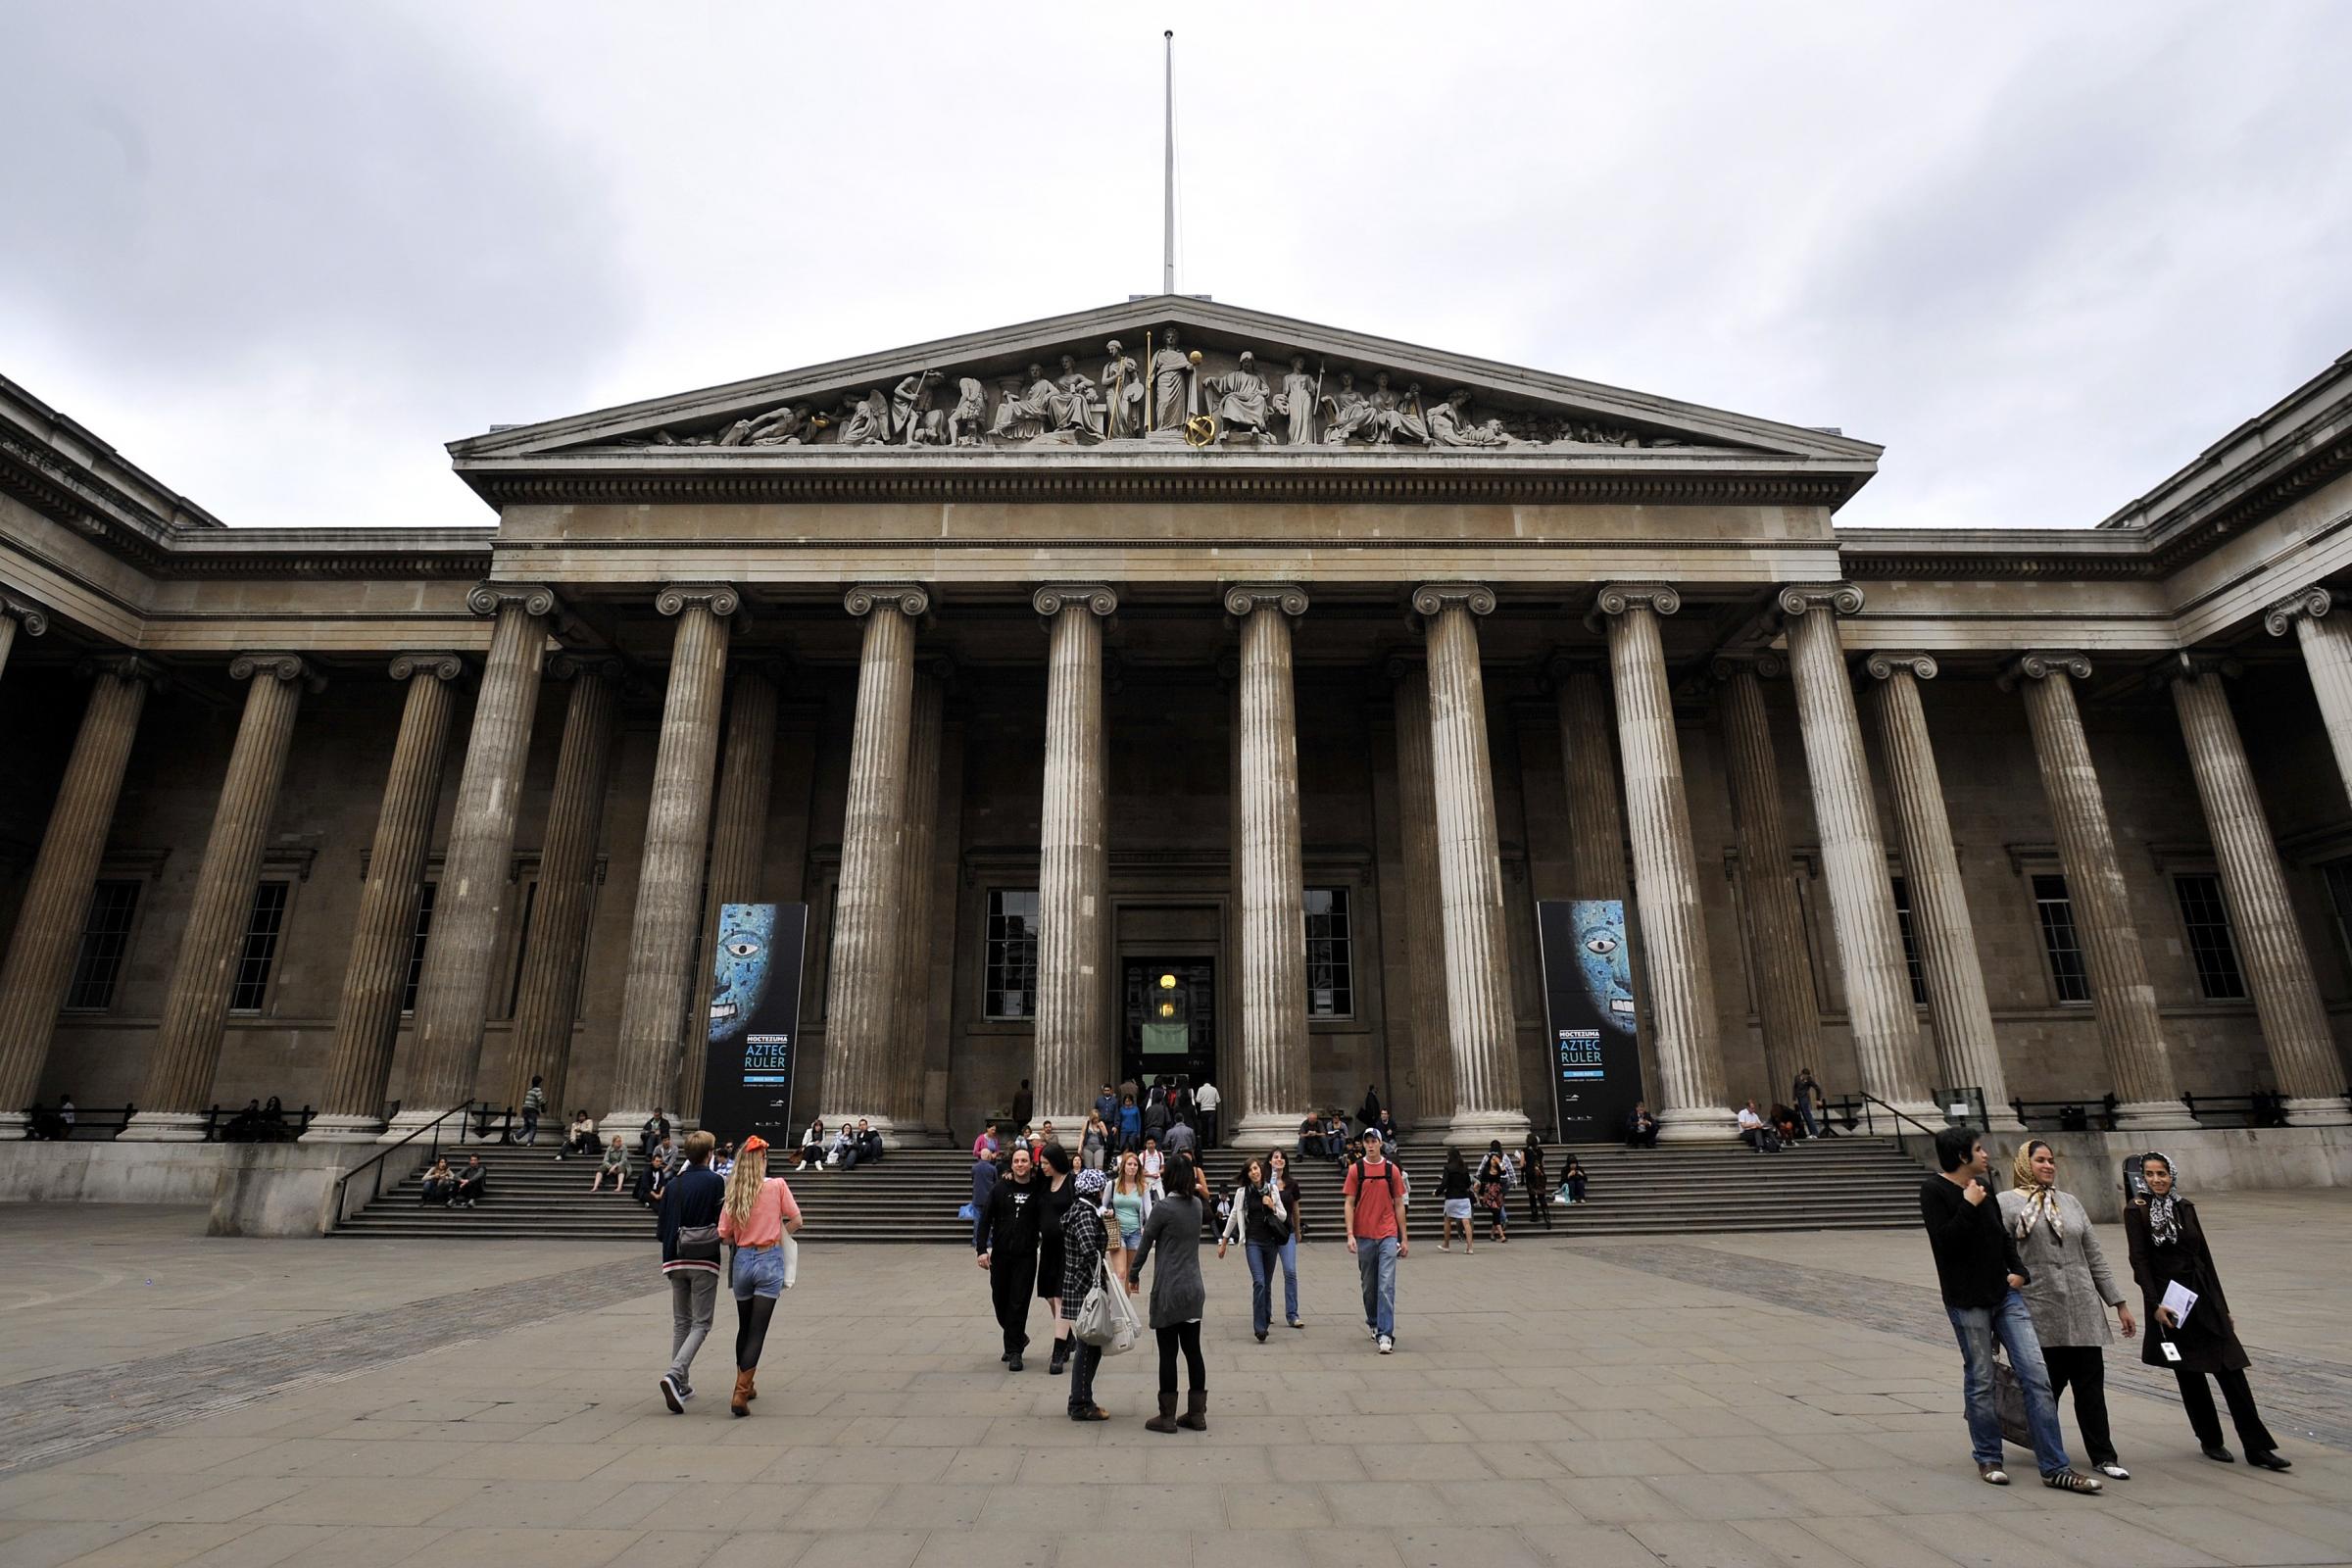 Artist in British Museum's Troy exhibition criticises BP sponsorship - Wirral Globe